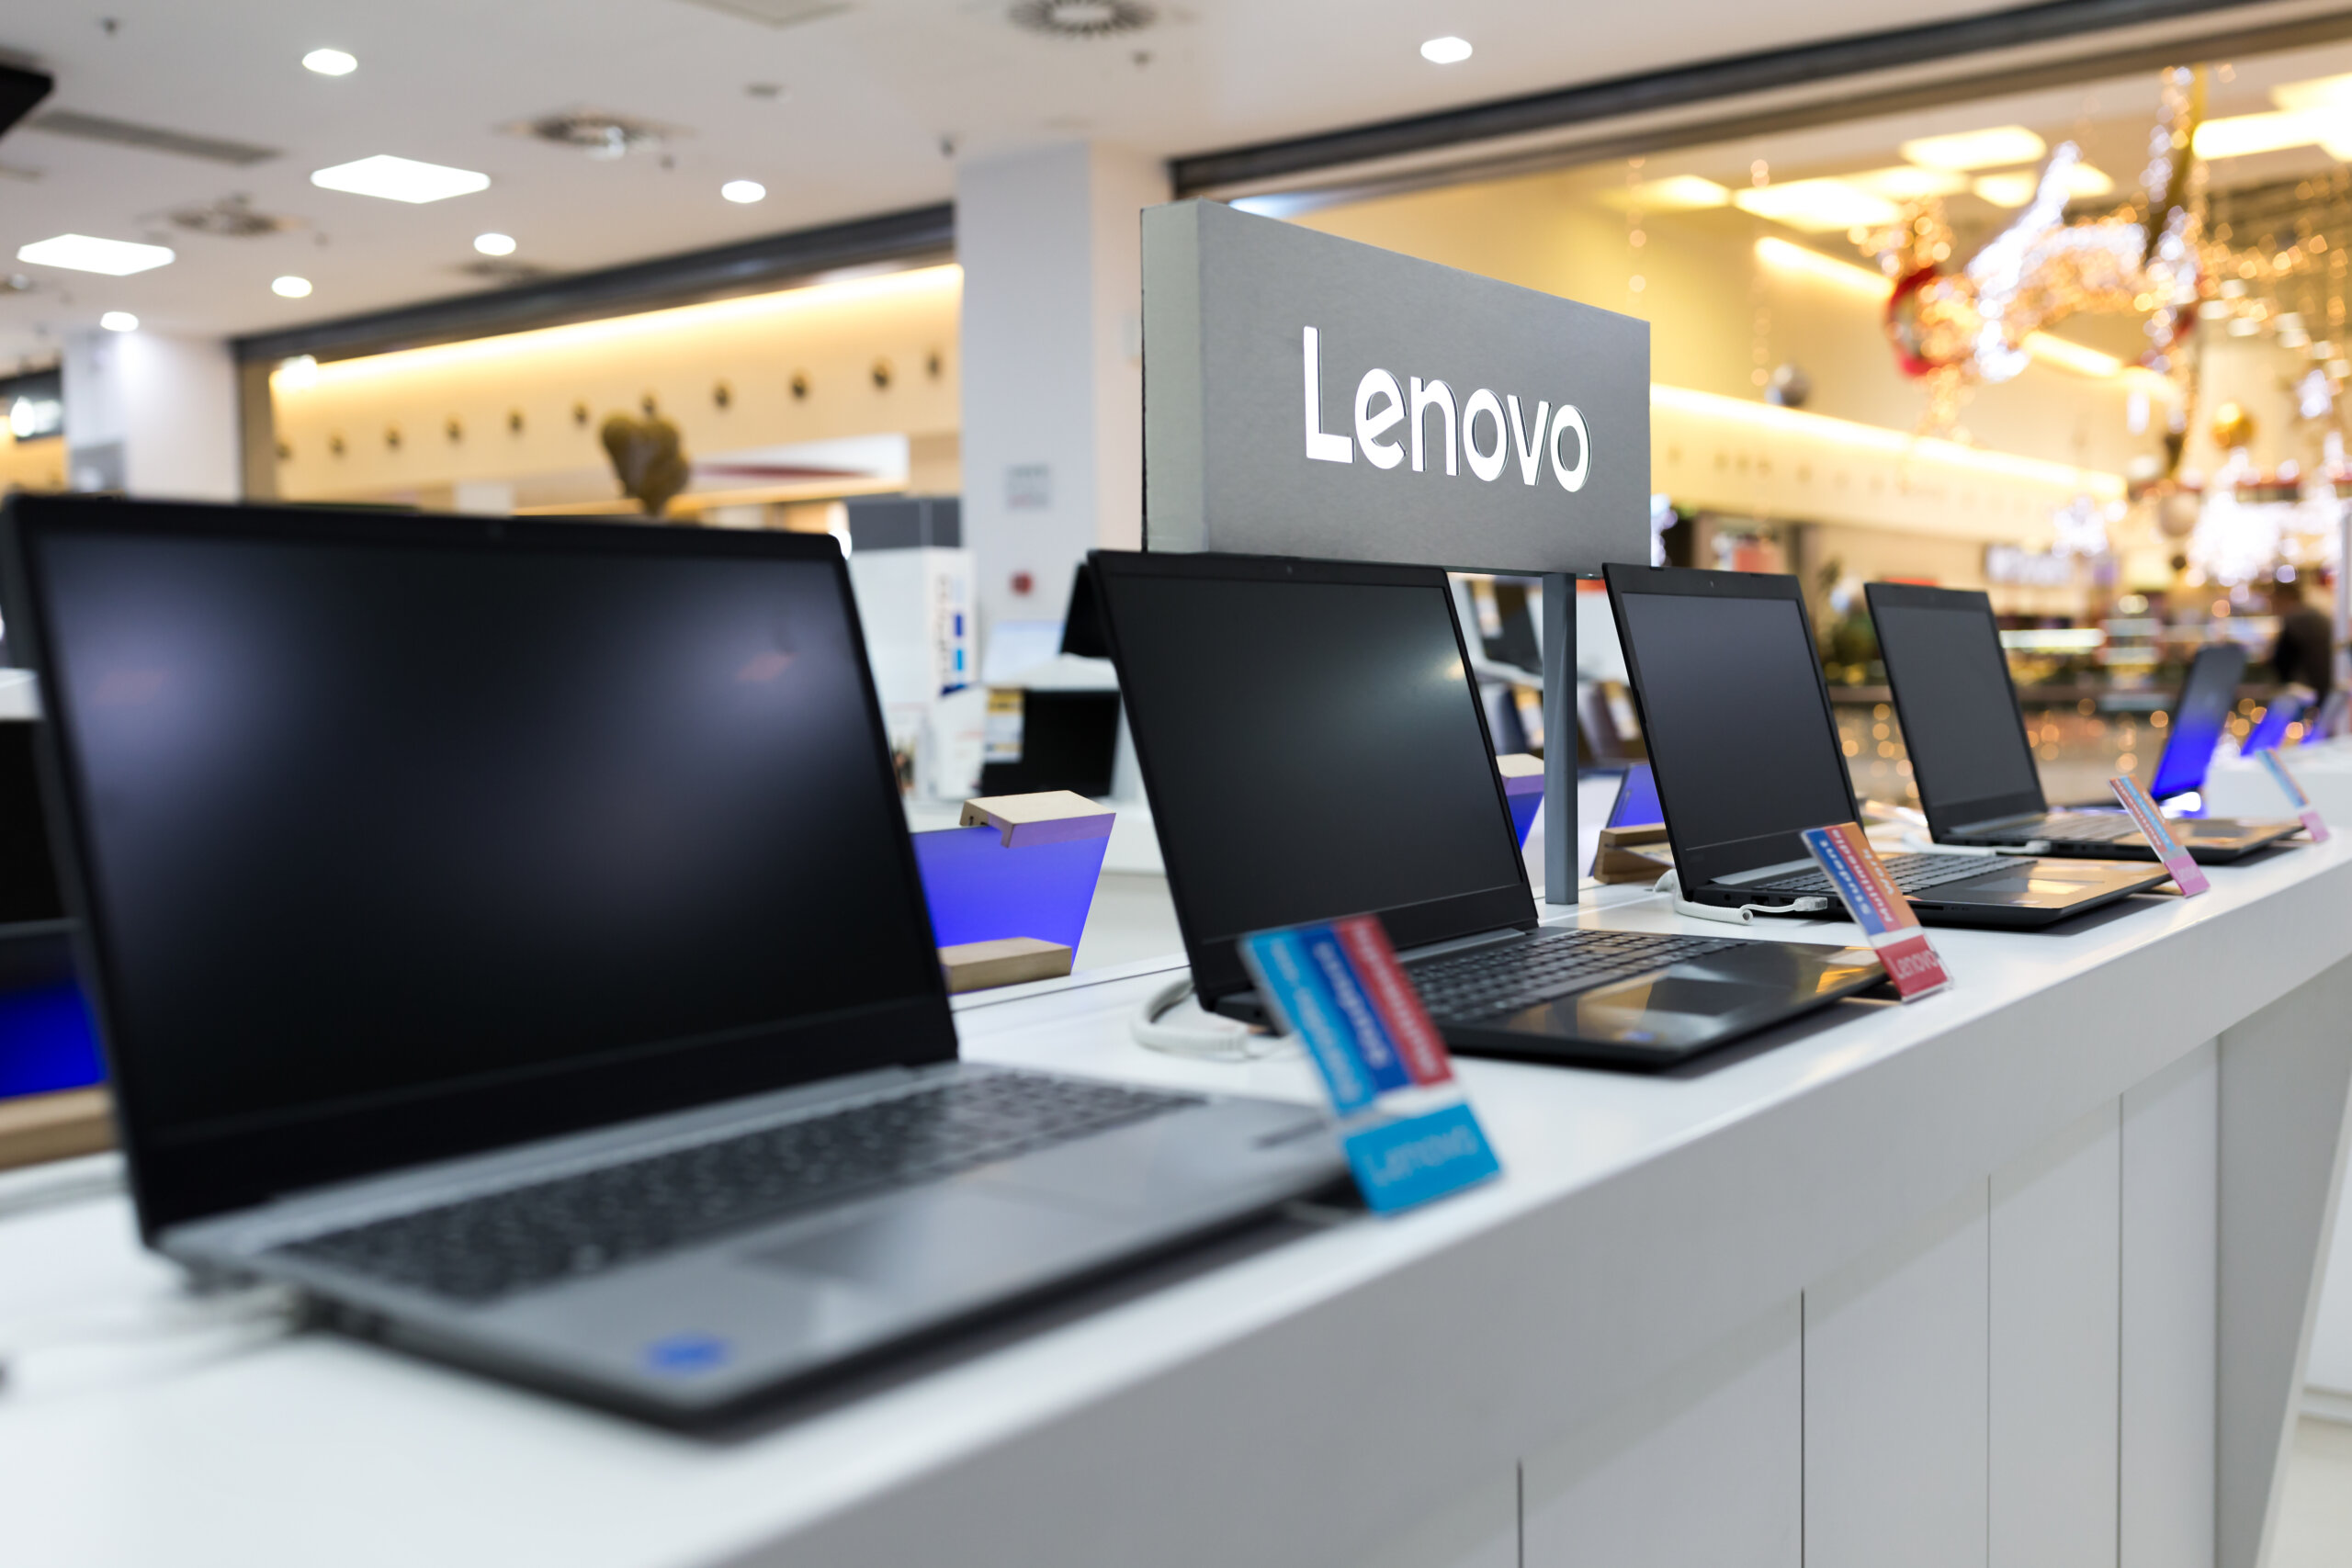 Lenovo said the unusual action of clearing inventory weakened profitability for its central business unit. Source: Shutterstock